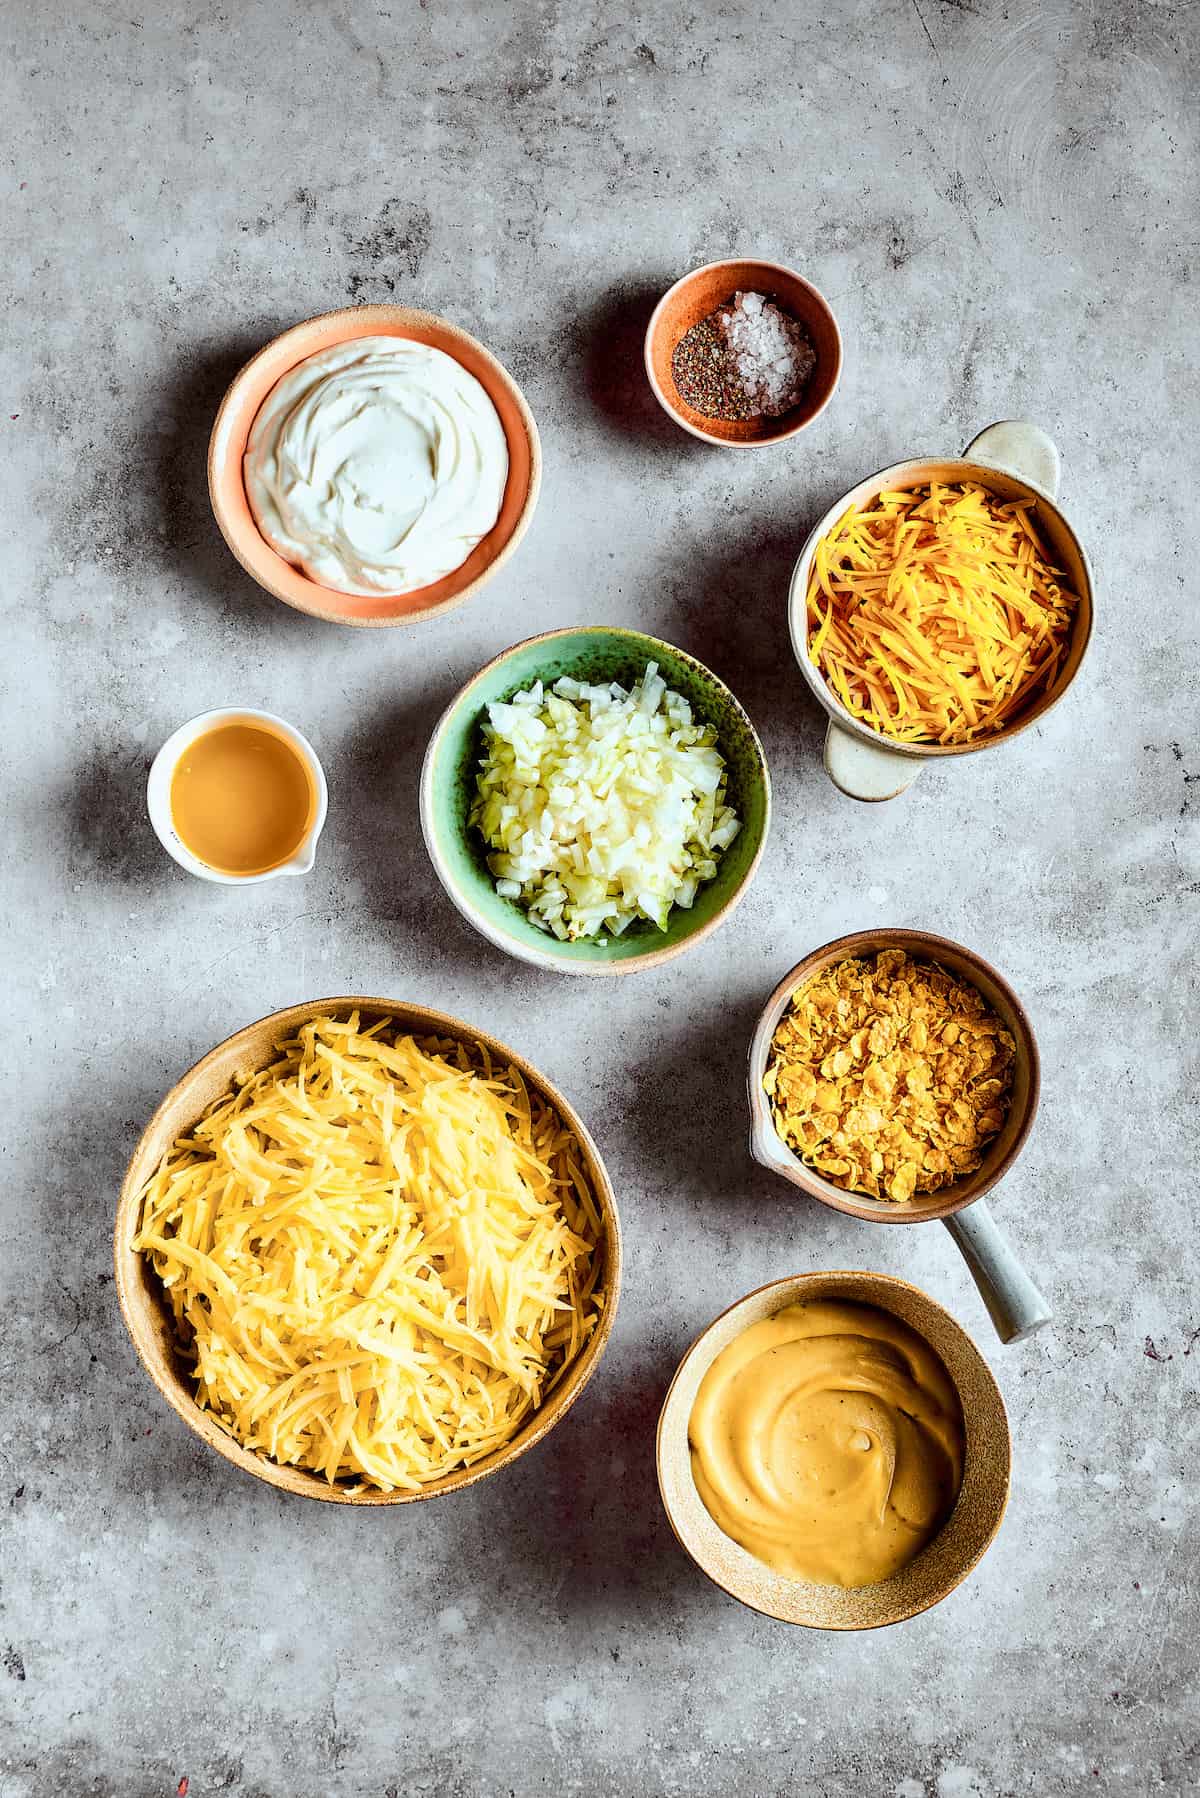 Ingredients for cheesy hashbrown casserole measured and arranged on a work surface.